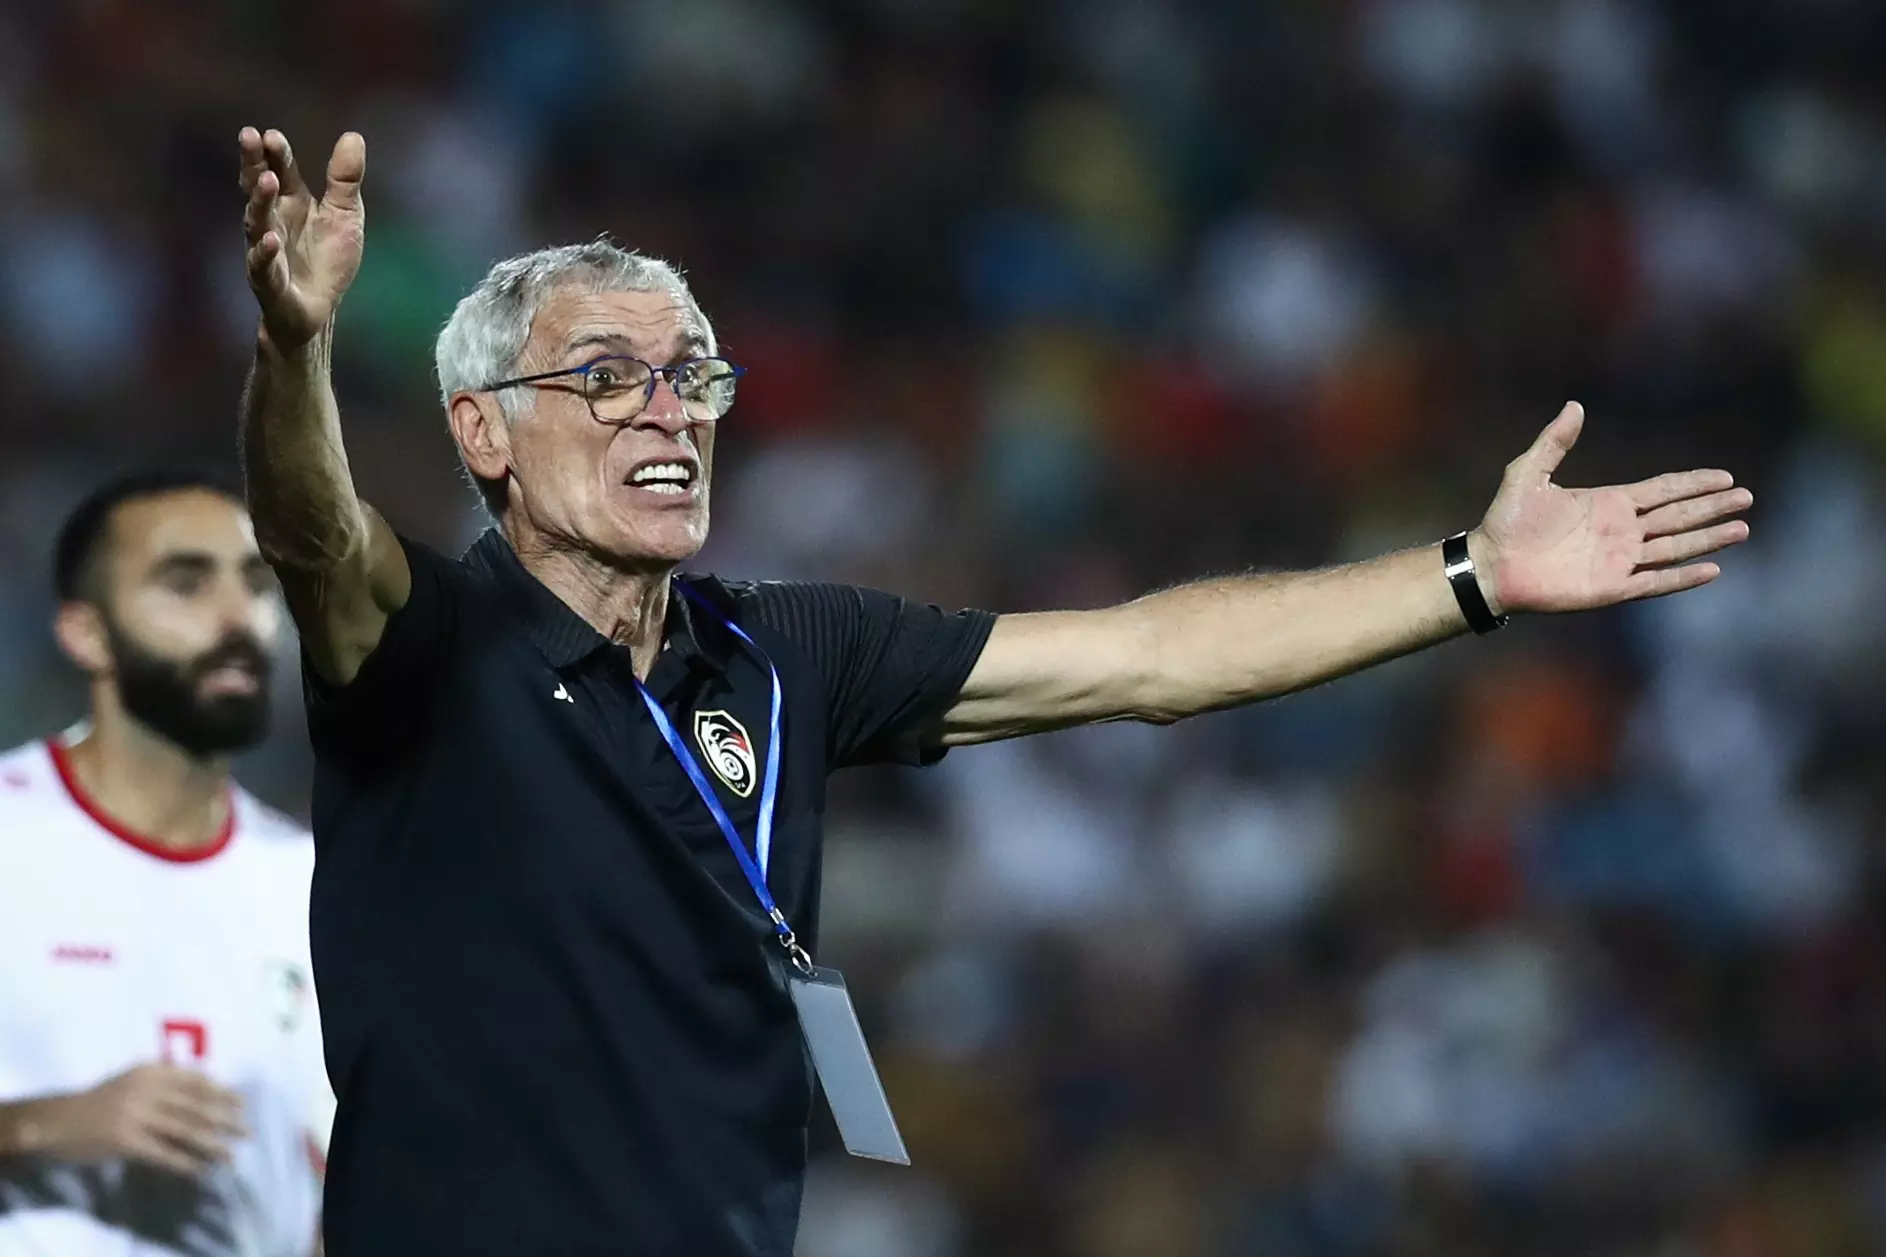 Syrian head-coach Hector Cuper in a game against Vietnam